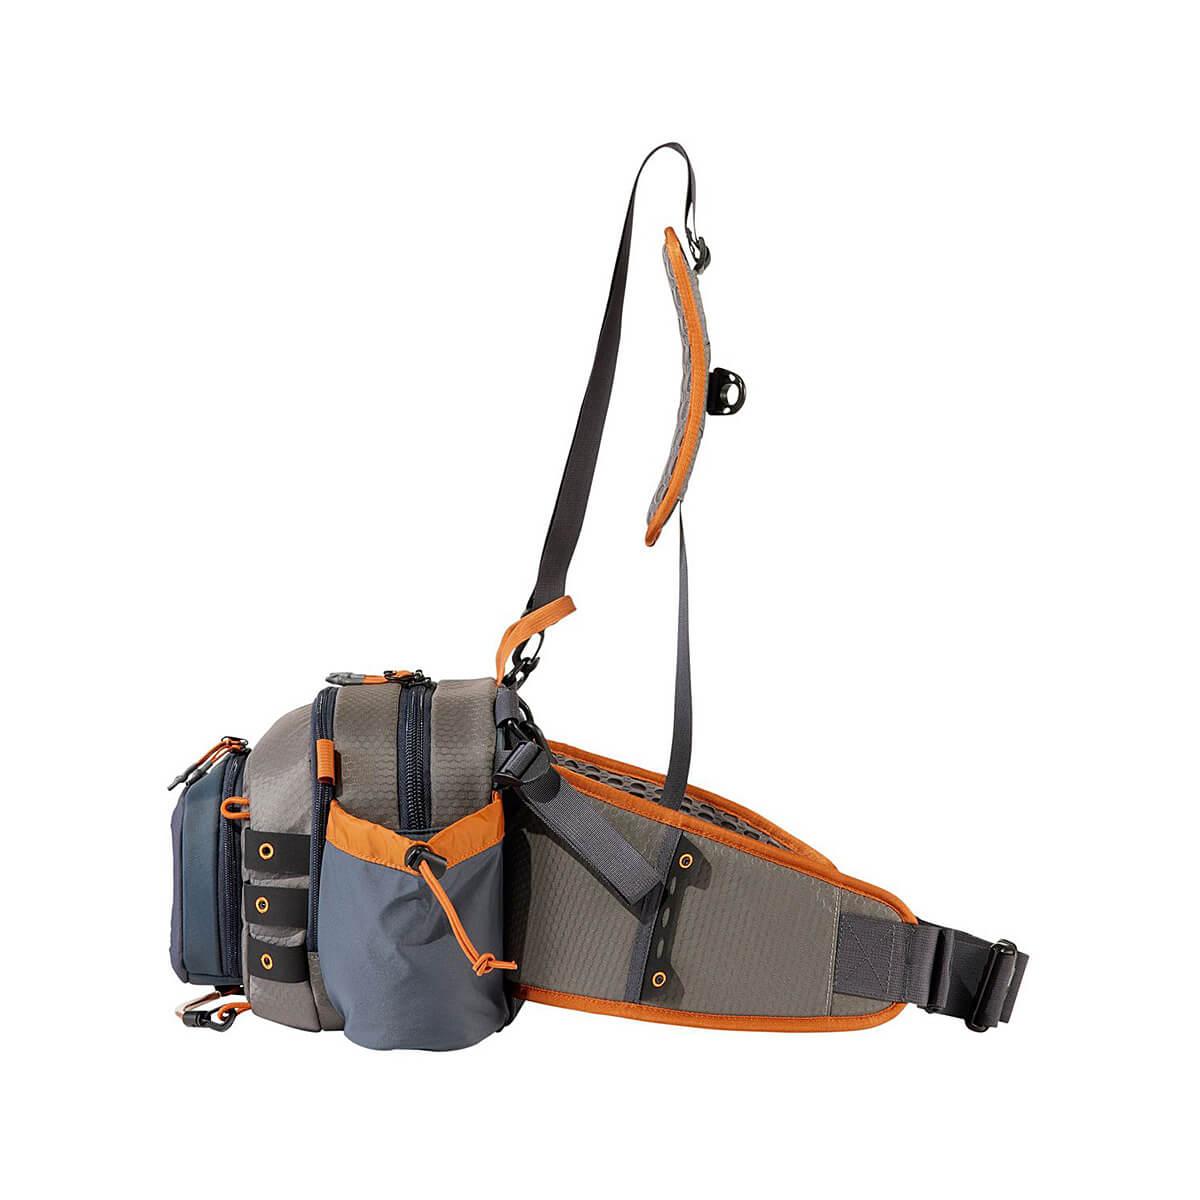 Loon nippers and cabela's chest/backpack - Fly Fishing BST Forum